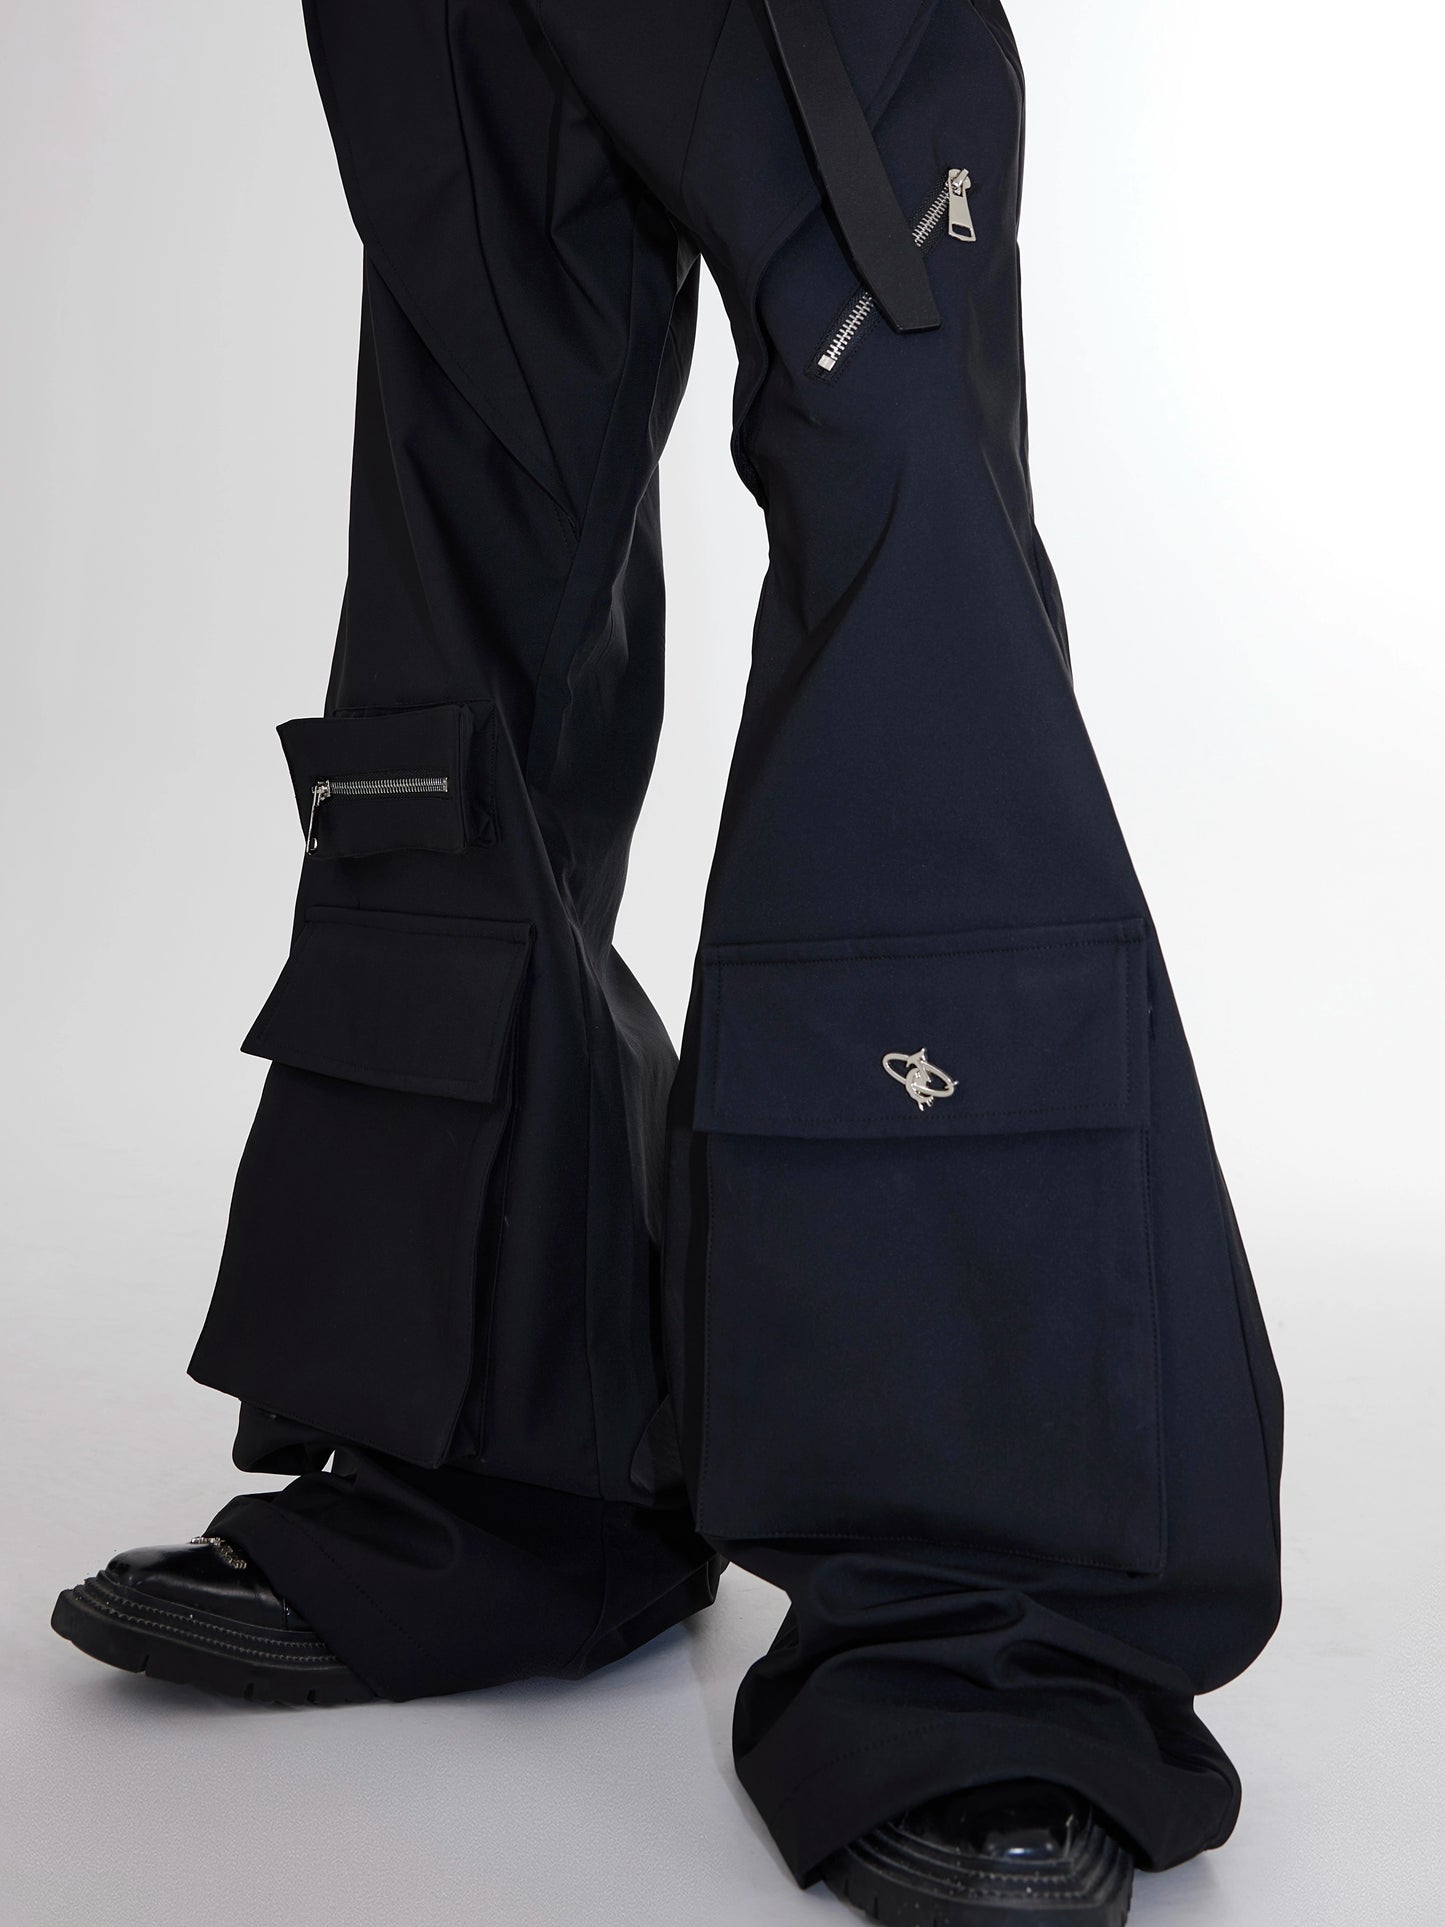 CulturE niche deconstructs large pocket panels, trousers, micro-flared high-waisted slacks, metal design trousers